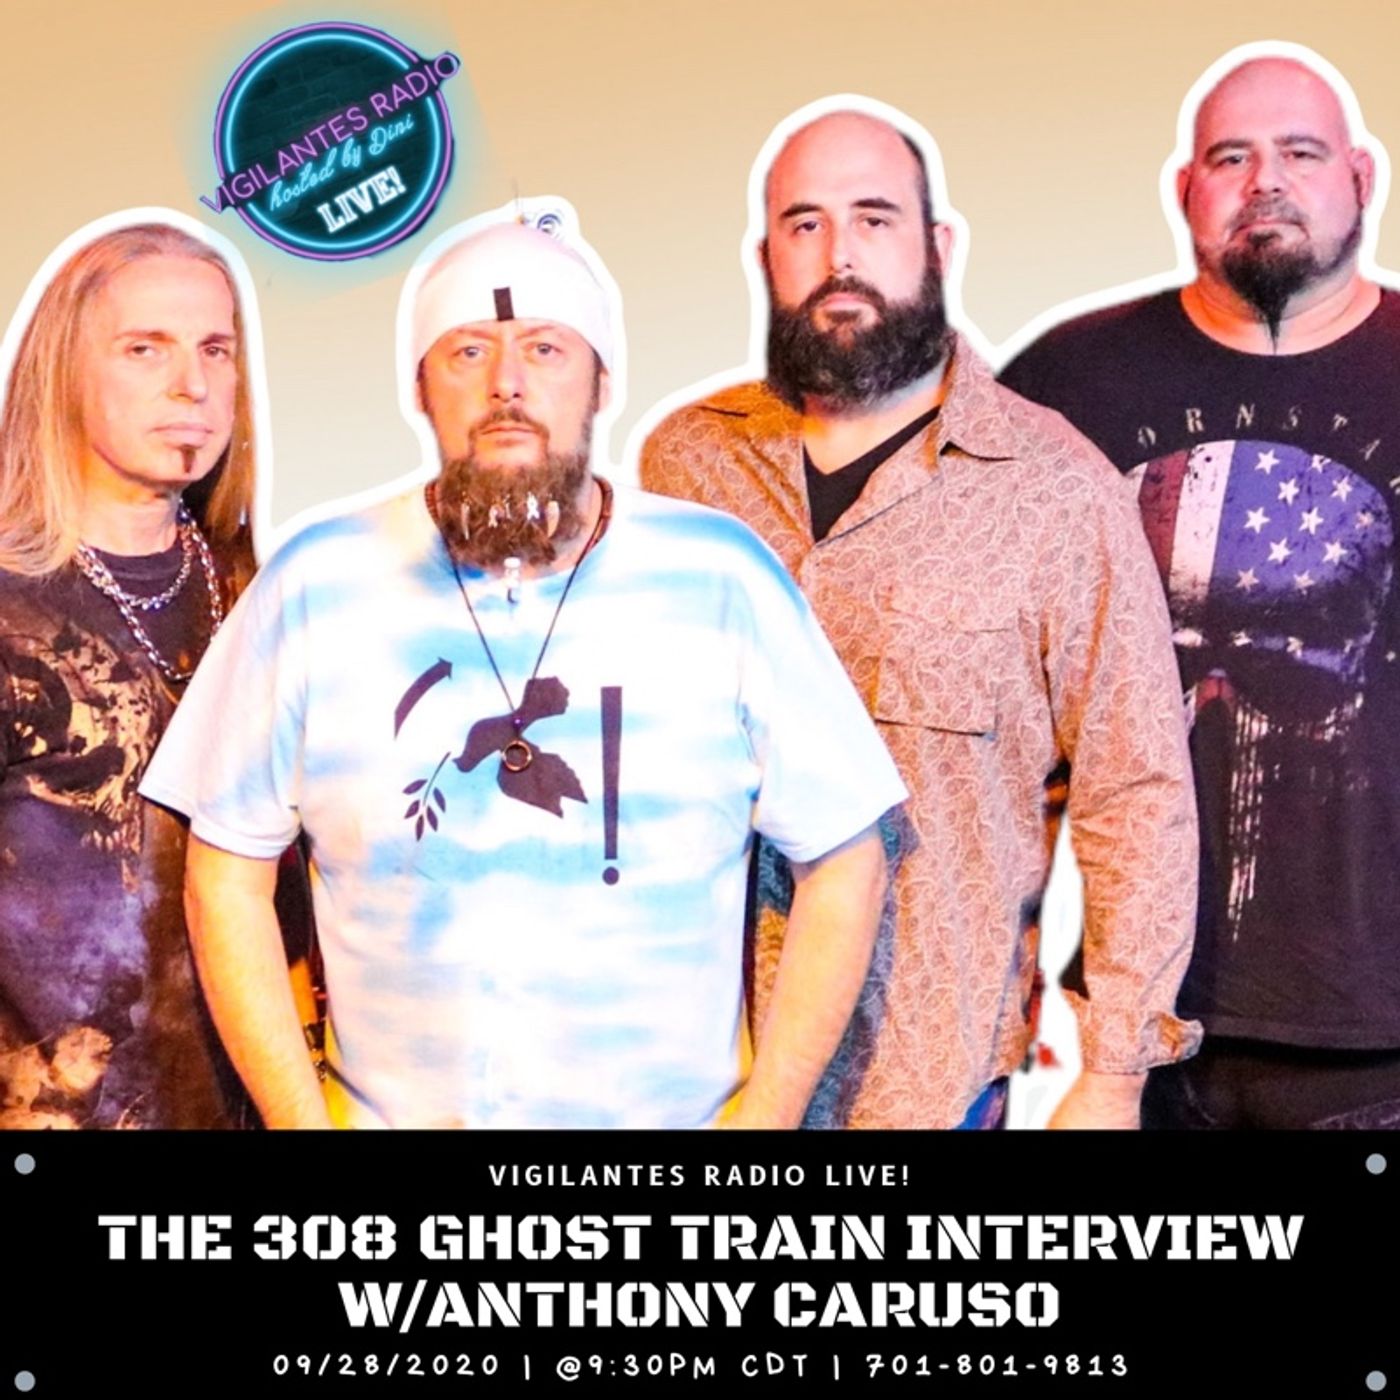 The 308 Ghost Train Interview w/Anthony Caruso.